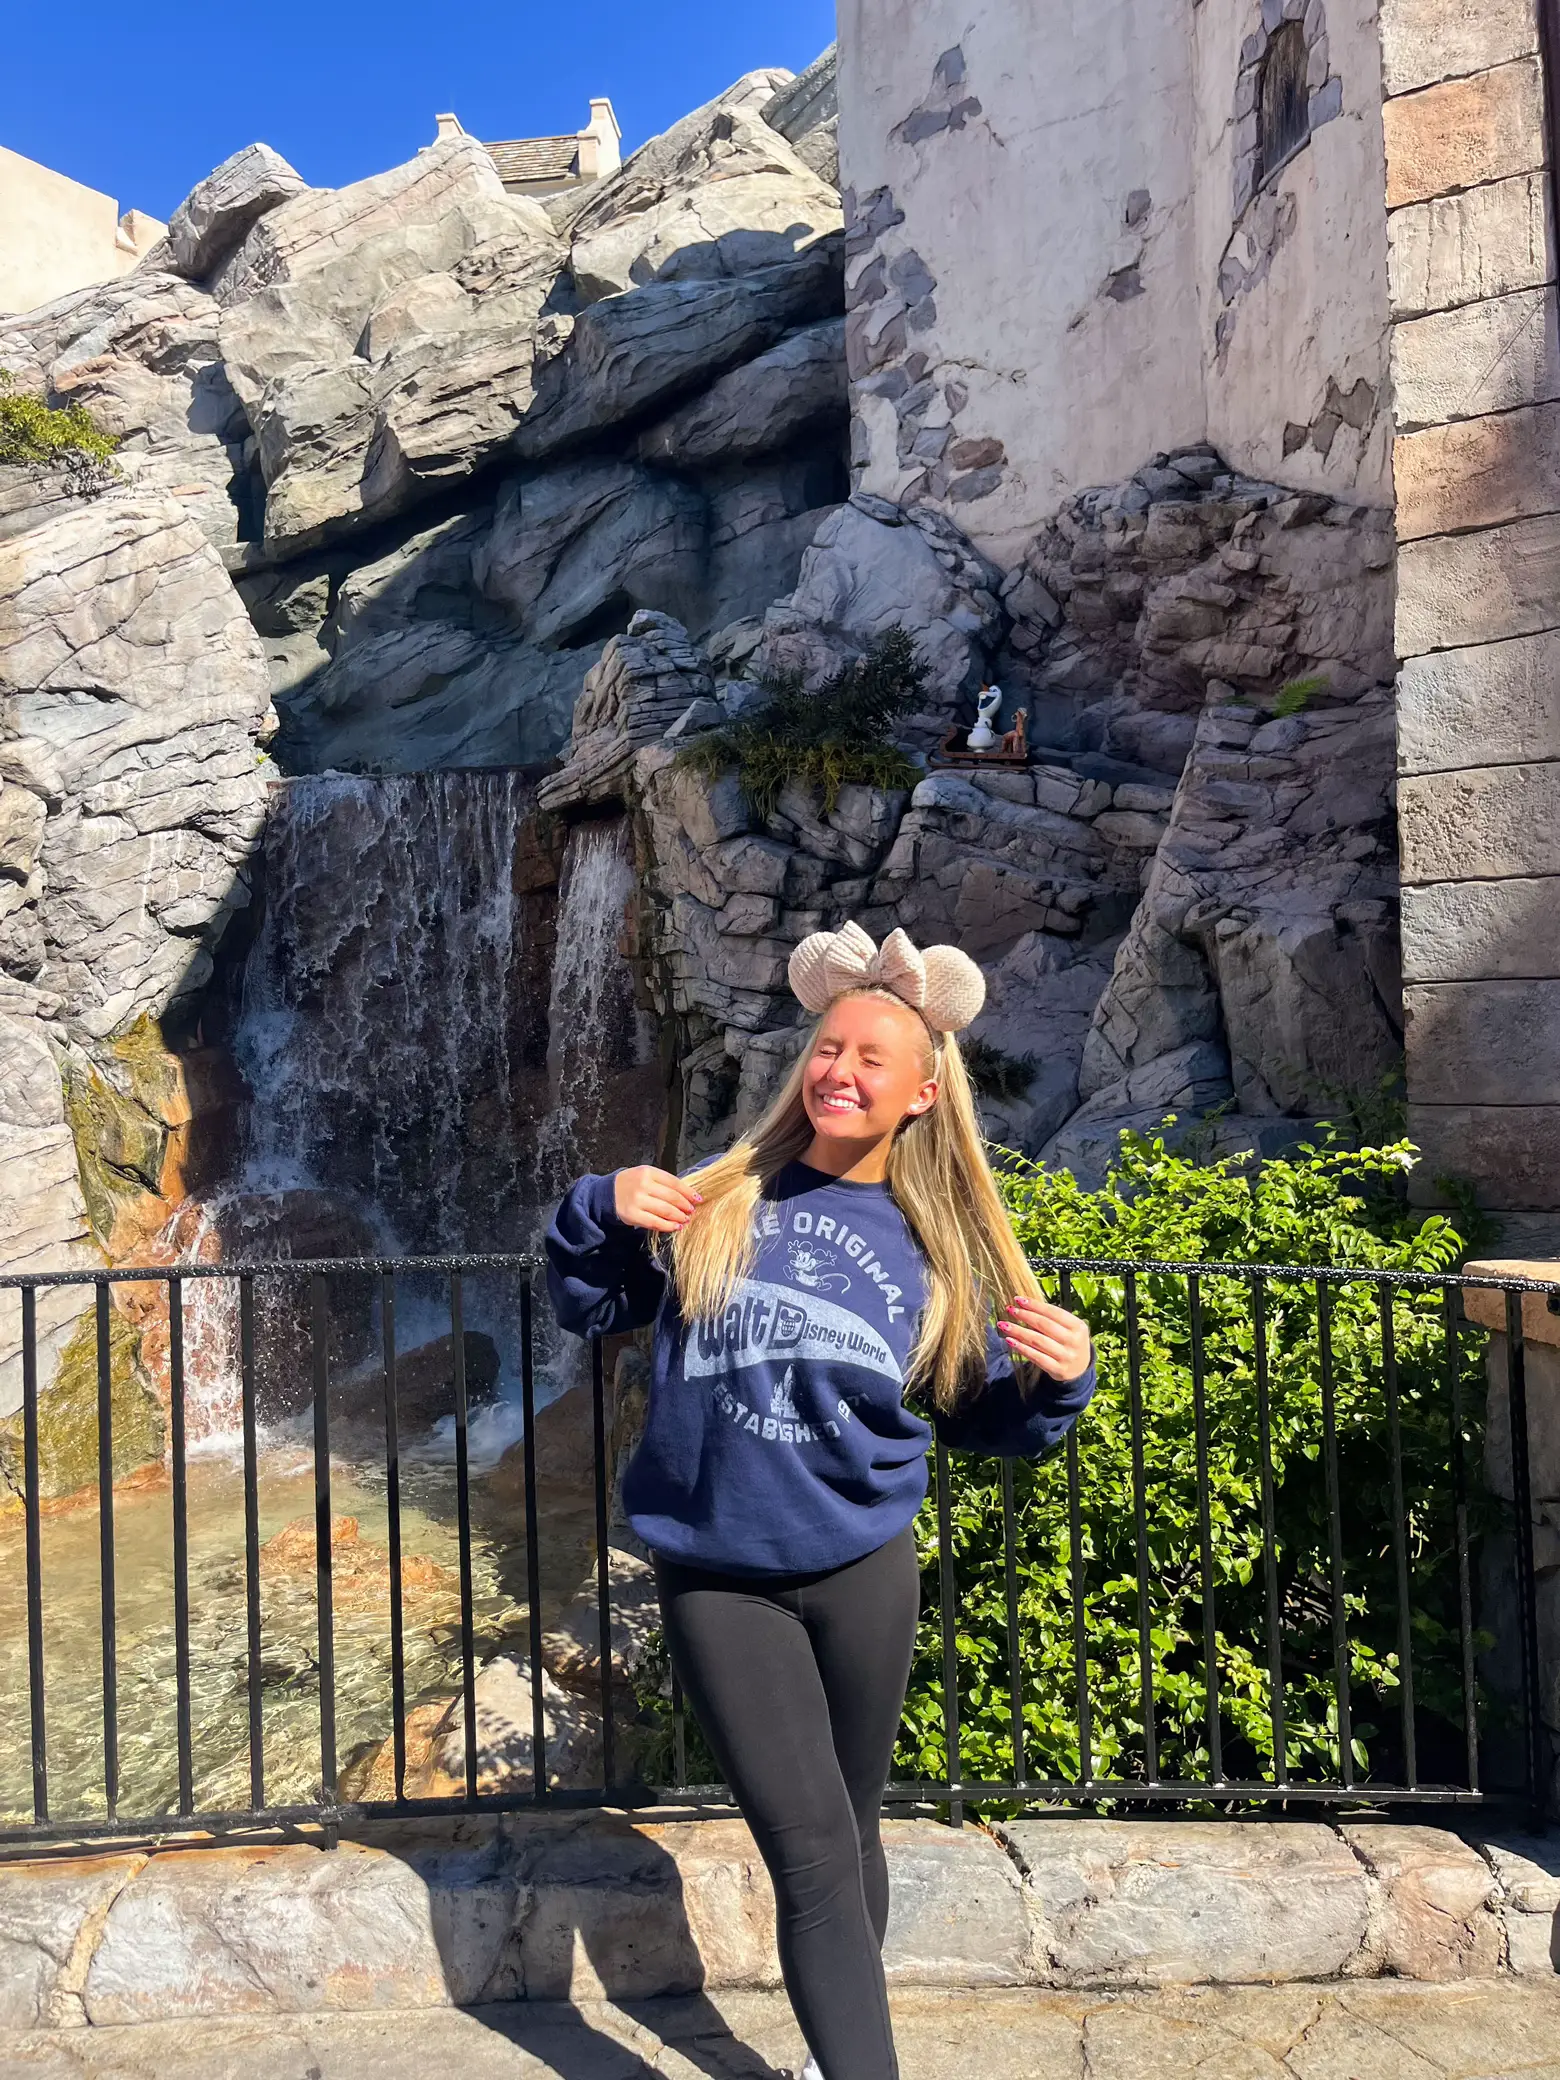  A woman wearing a World Water Park sweatshirt is standing in front of a waterfall.